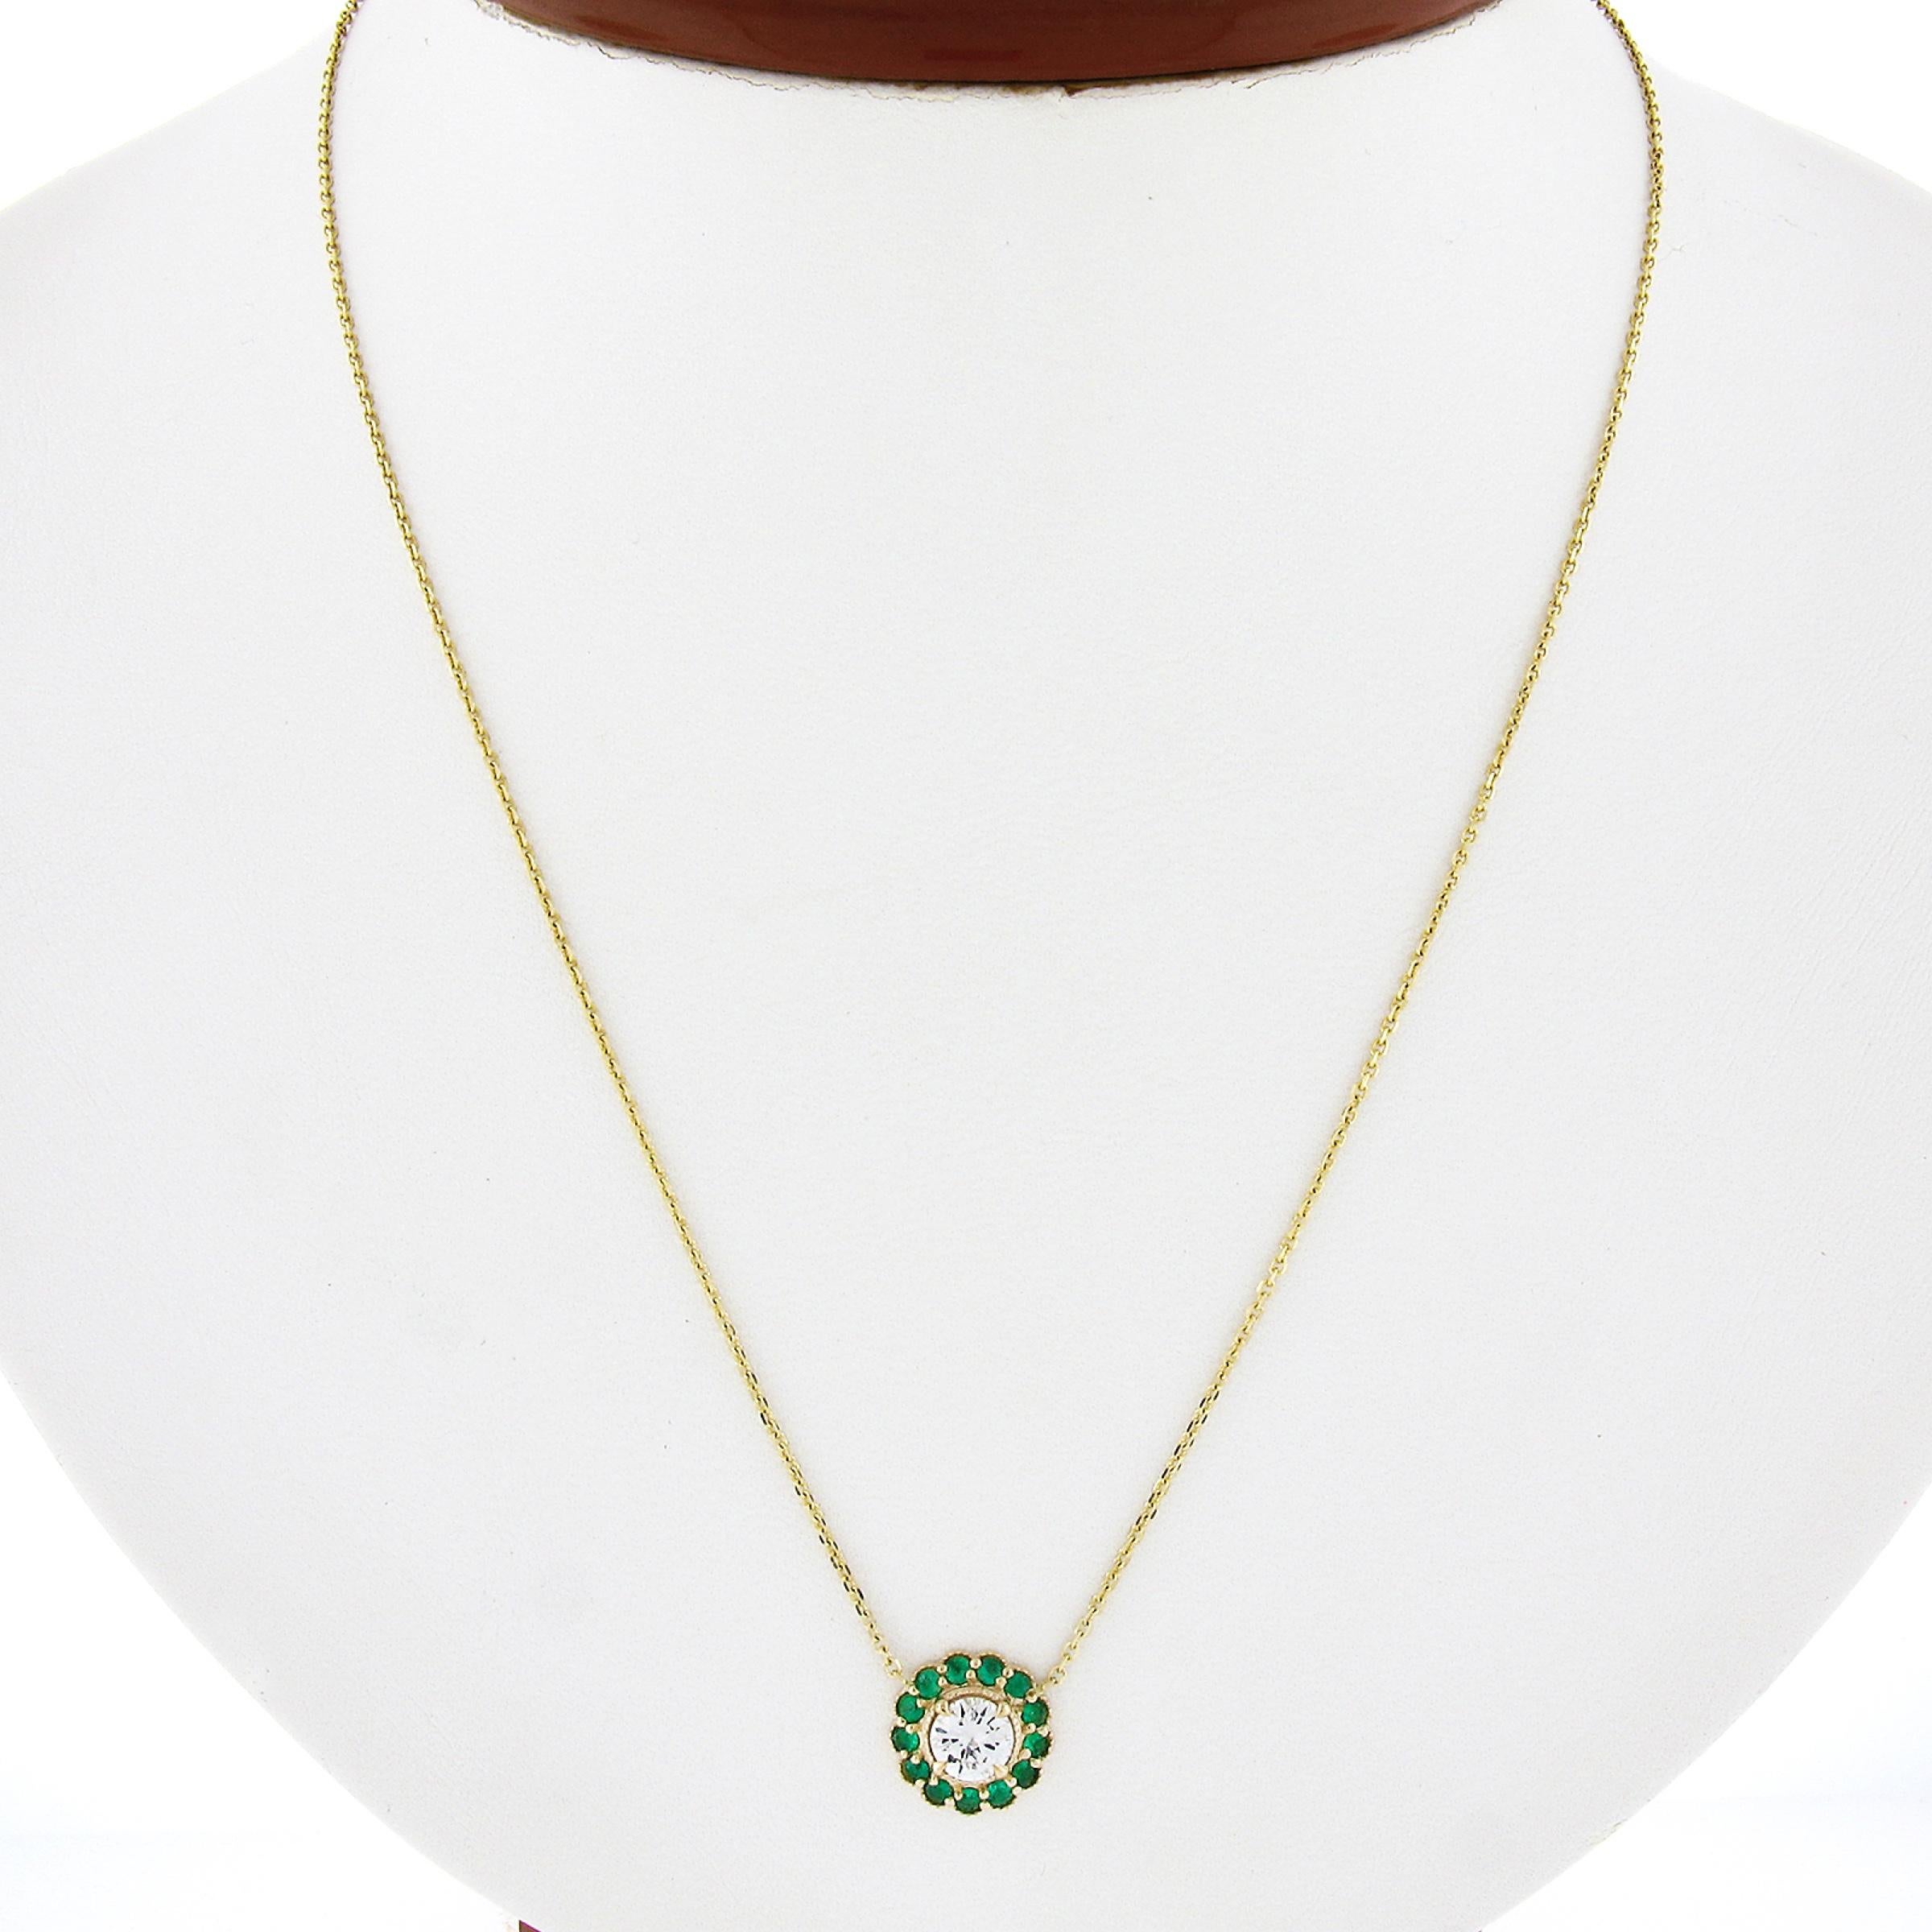 This gorgeous and very well made pendant necklace is newly crafted in solid 14k yellow gold and features a stunning diamond neatly prong set at the center of a vibrant emerald halo. The round brilliant cut diamond is an attractive size at 0.52